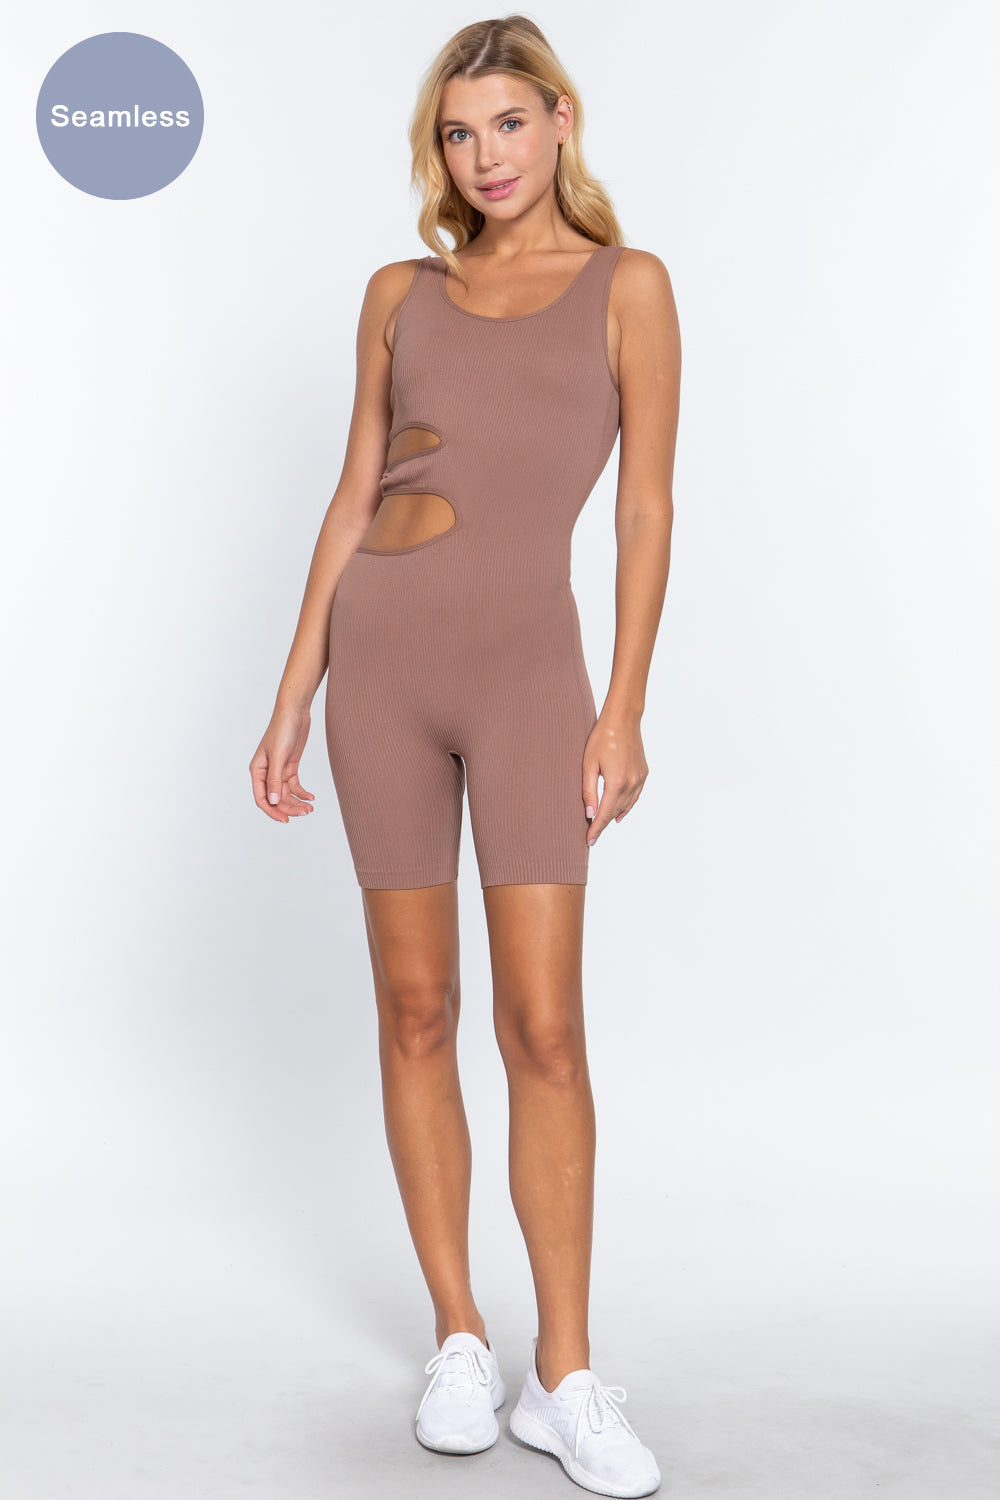 Tank tops Suave Cut-out Seamless Mauve Romper Jumpsuits & Rompers jehouze 